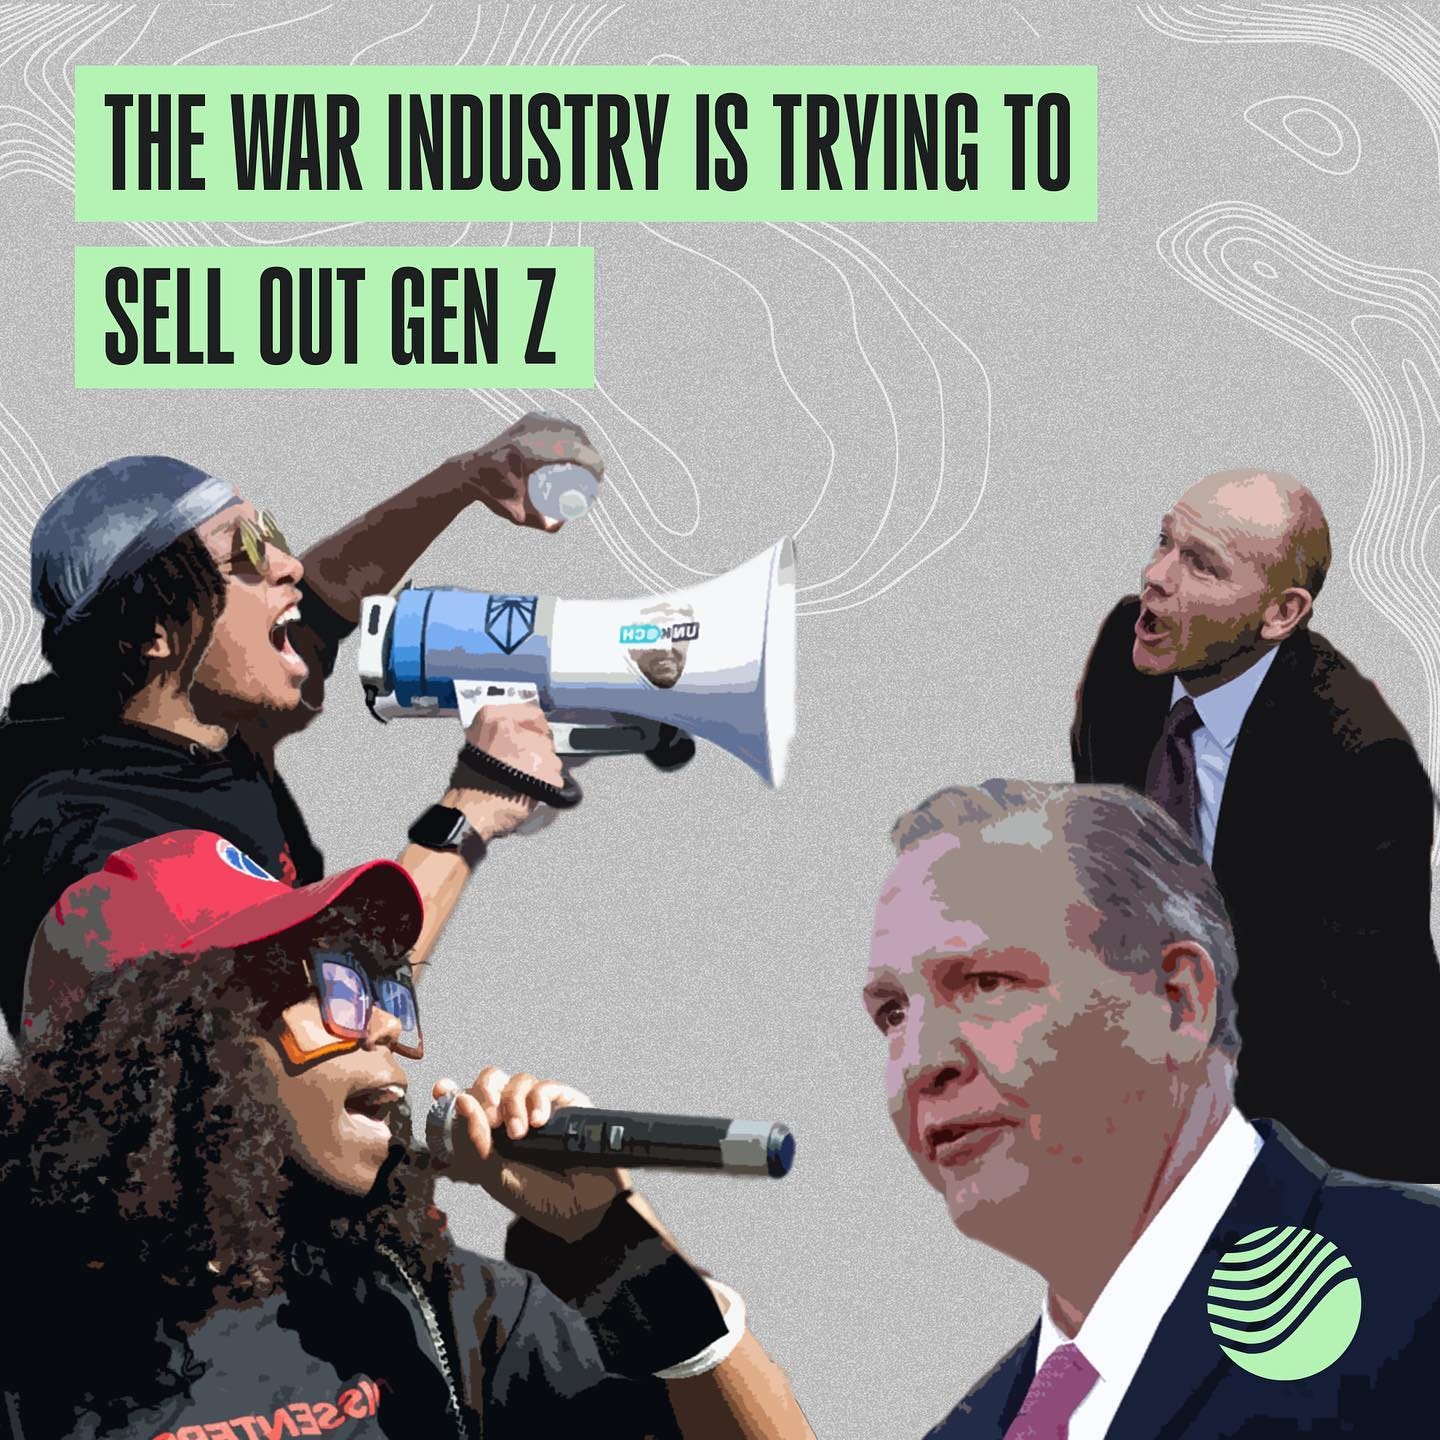 May be a graphic of 3 people, banner, magazine, poster and text that says 'THE WAR INDUSTRY IS TRYING TO SELL OUT GEN Z O H5D MU 1002132'